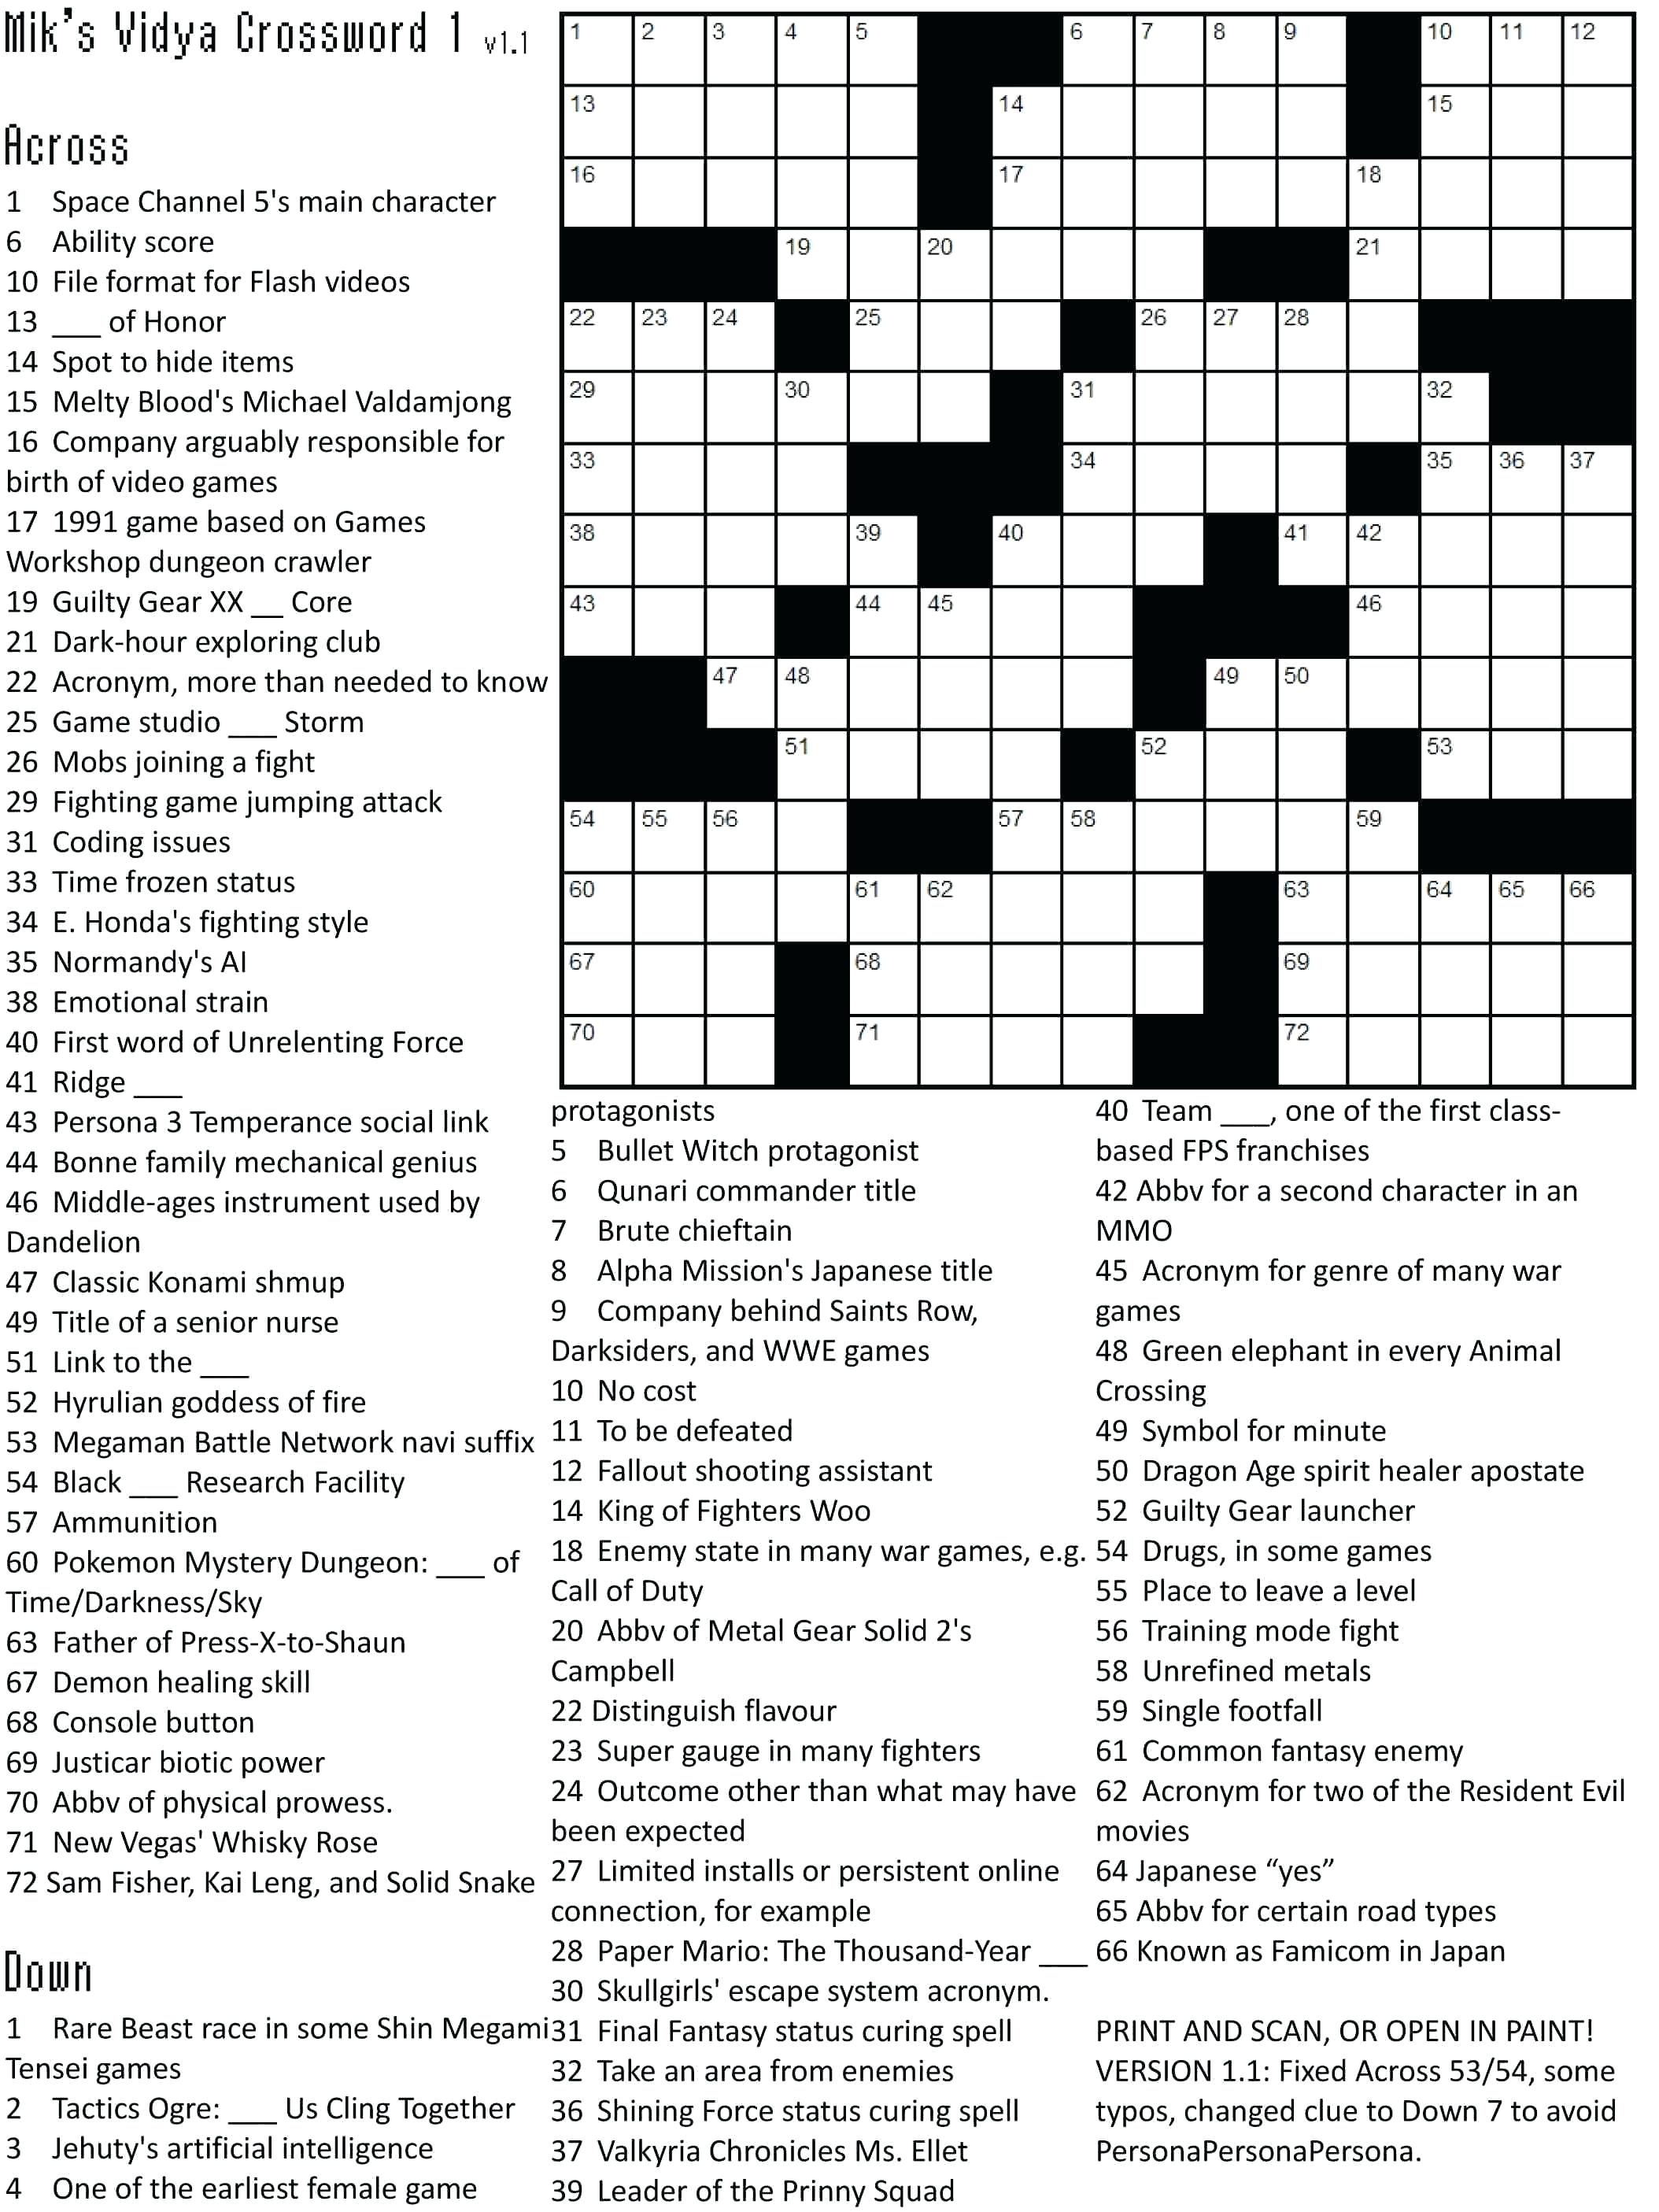 Free Printable Themed Crossword Puzzles – Myheartbeats.club - Printable Crossword Puzzles For December 2018